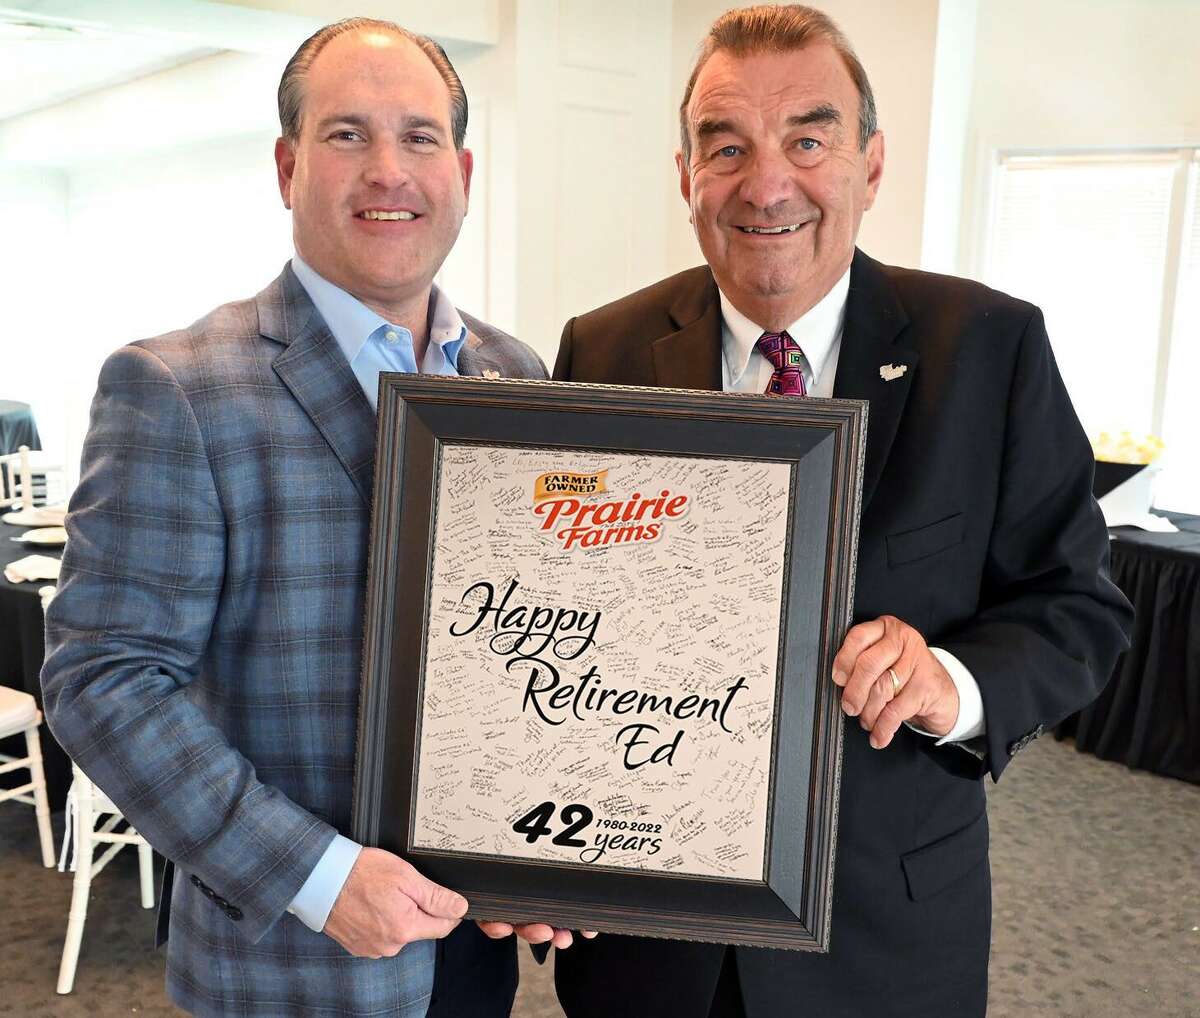 Current CEO for Prairie Farms Matt McClelland, left, presents former CEO Ed Mullins with a retirement gift during a recent event at Prairie Farms' headquarters in Edwardsville.